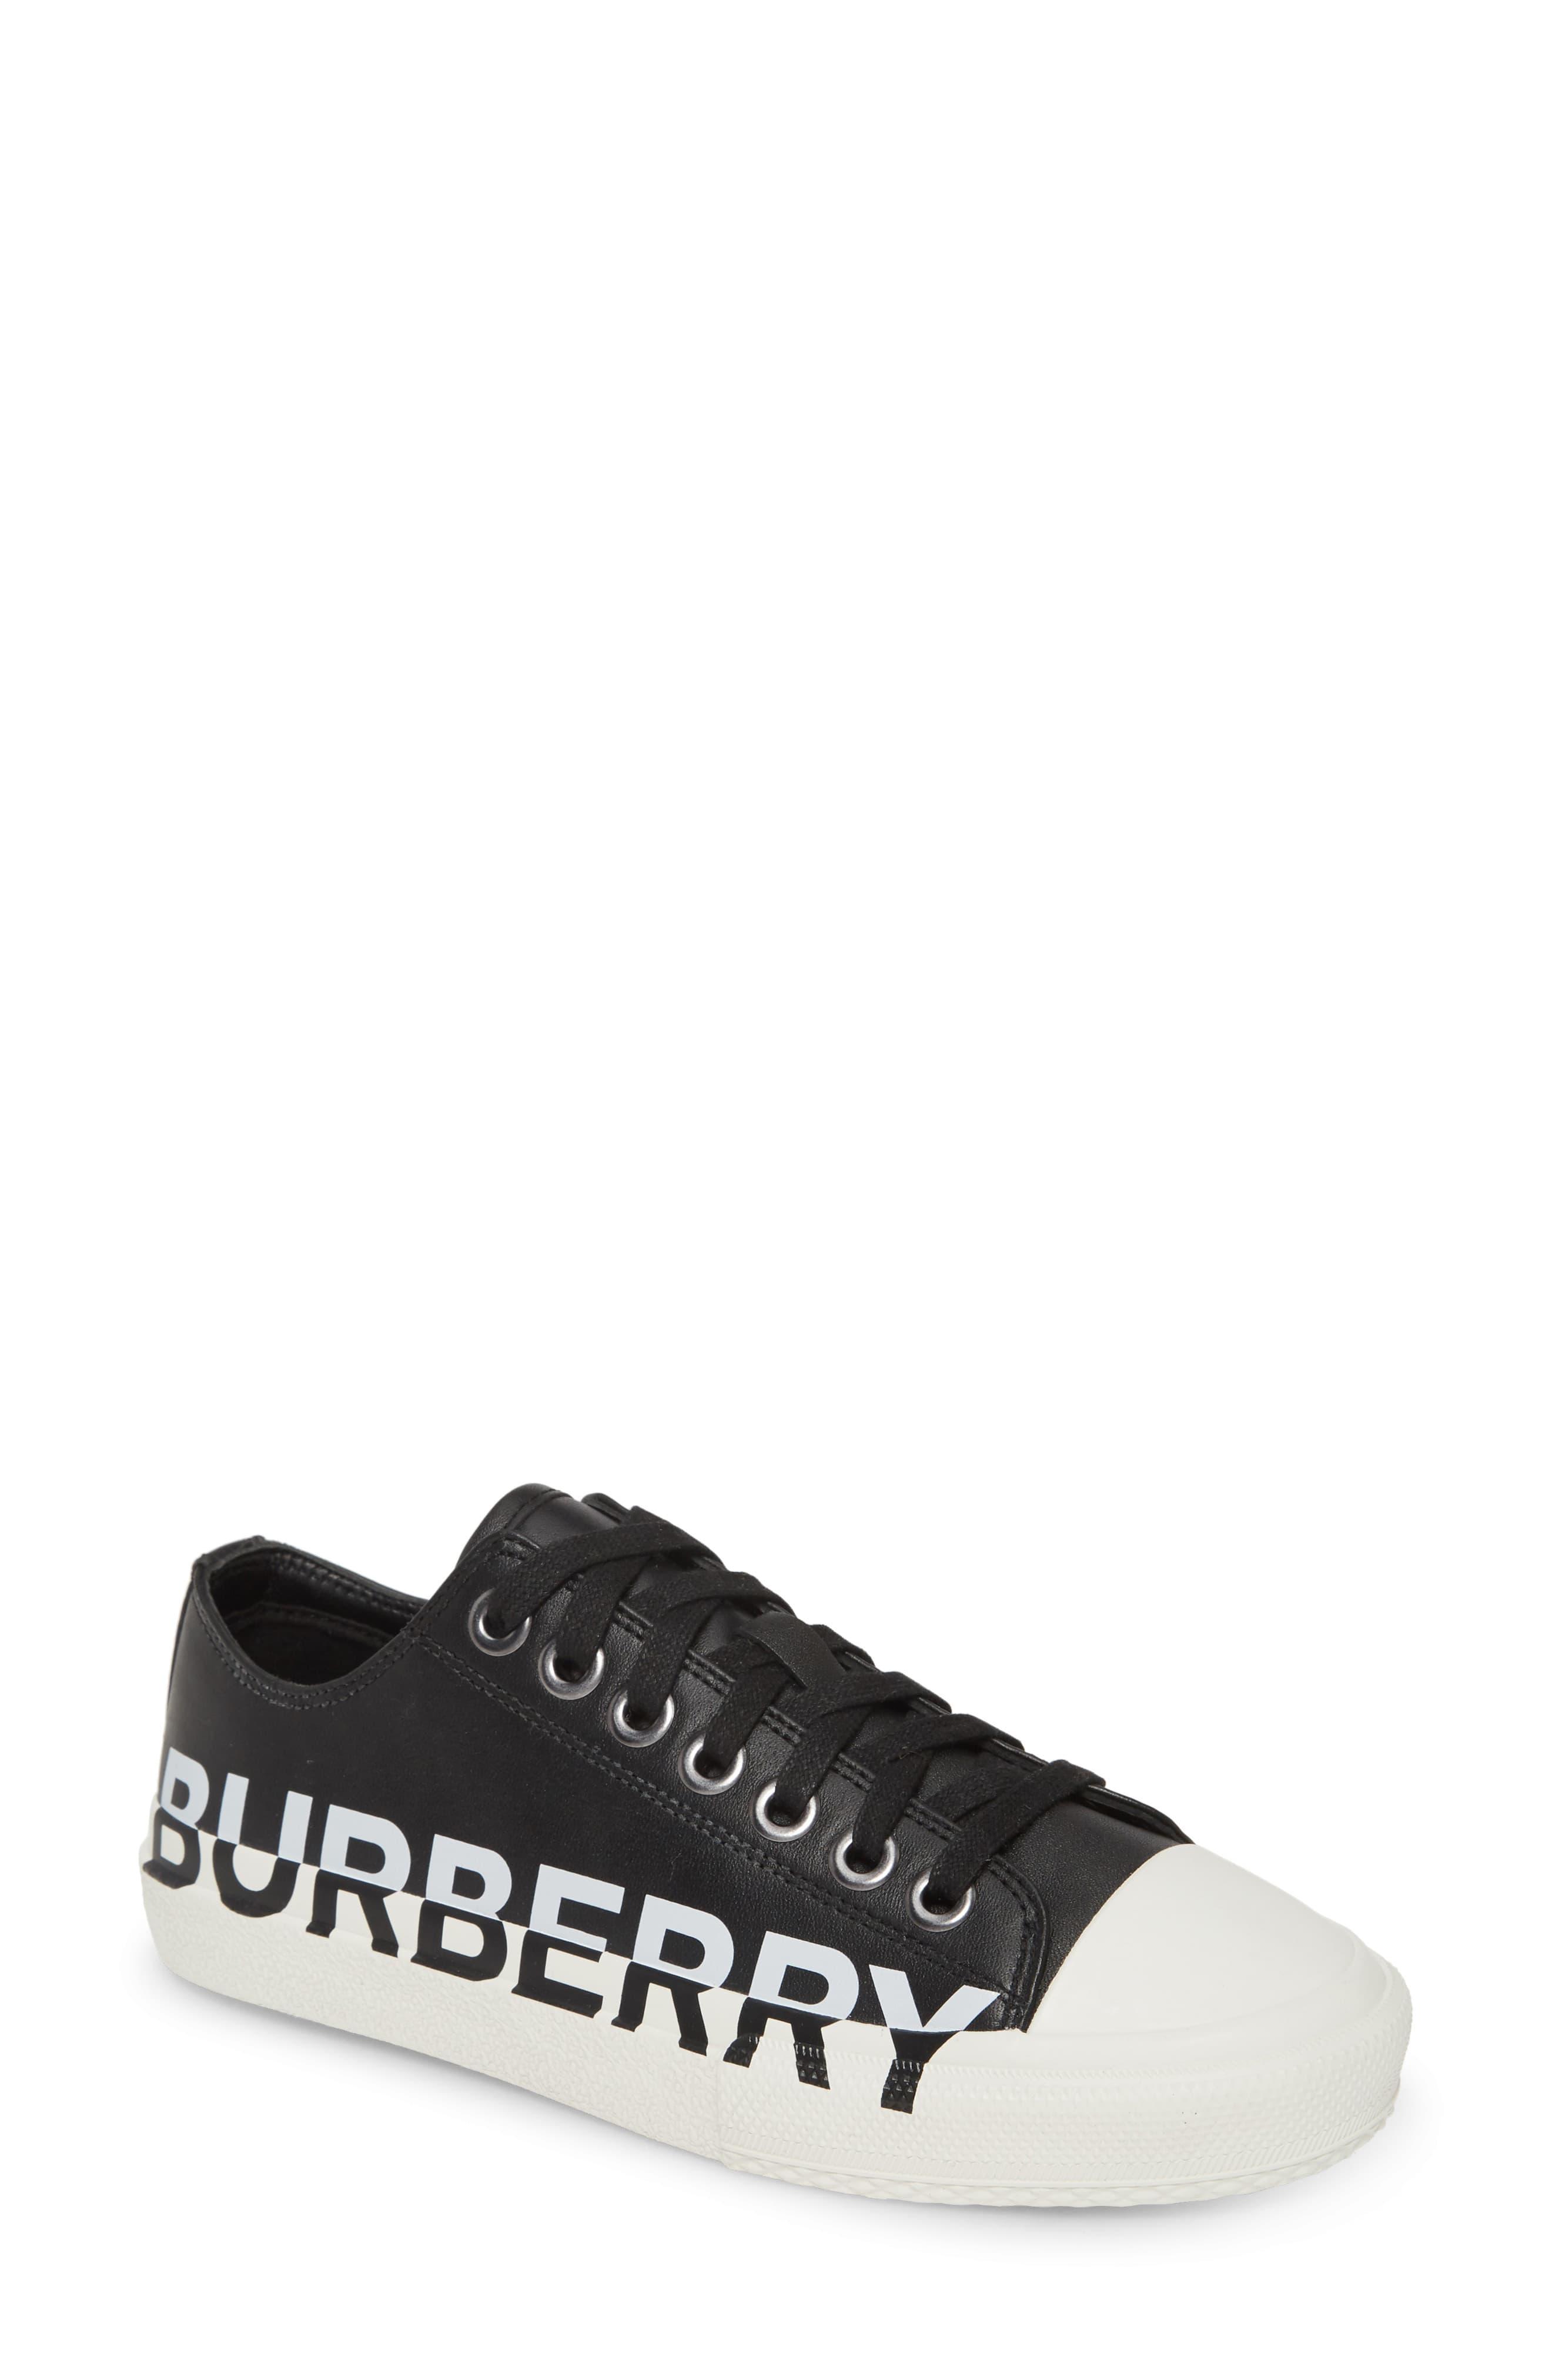 Burberry Larkhall Low-top Sneakers In Black Calf Leather - Save 66% - Lyst